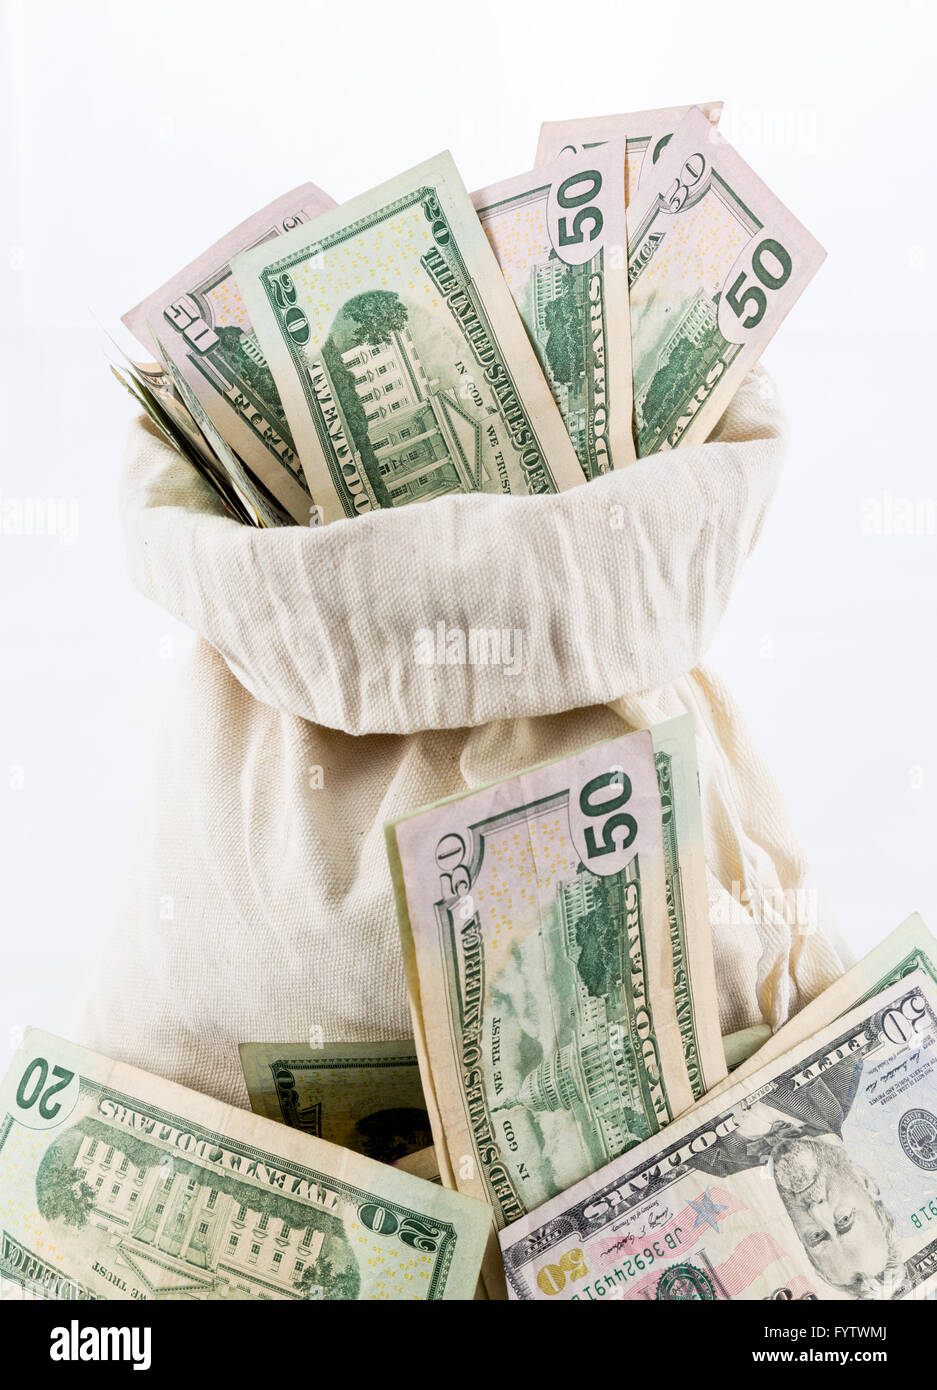 Many US dollar bills or notes with money bags Stock Photo - Alamy